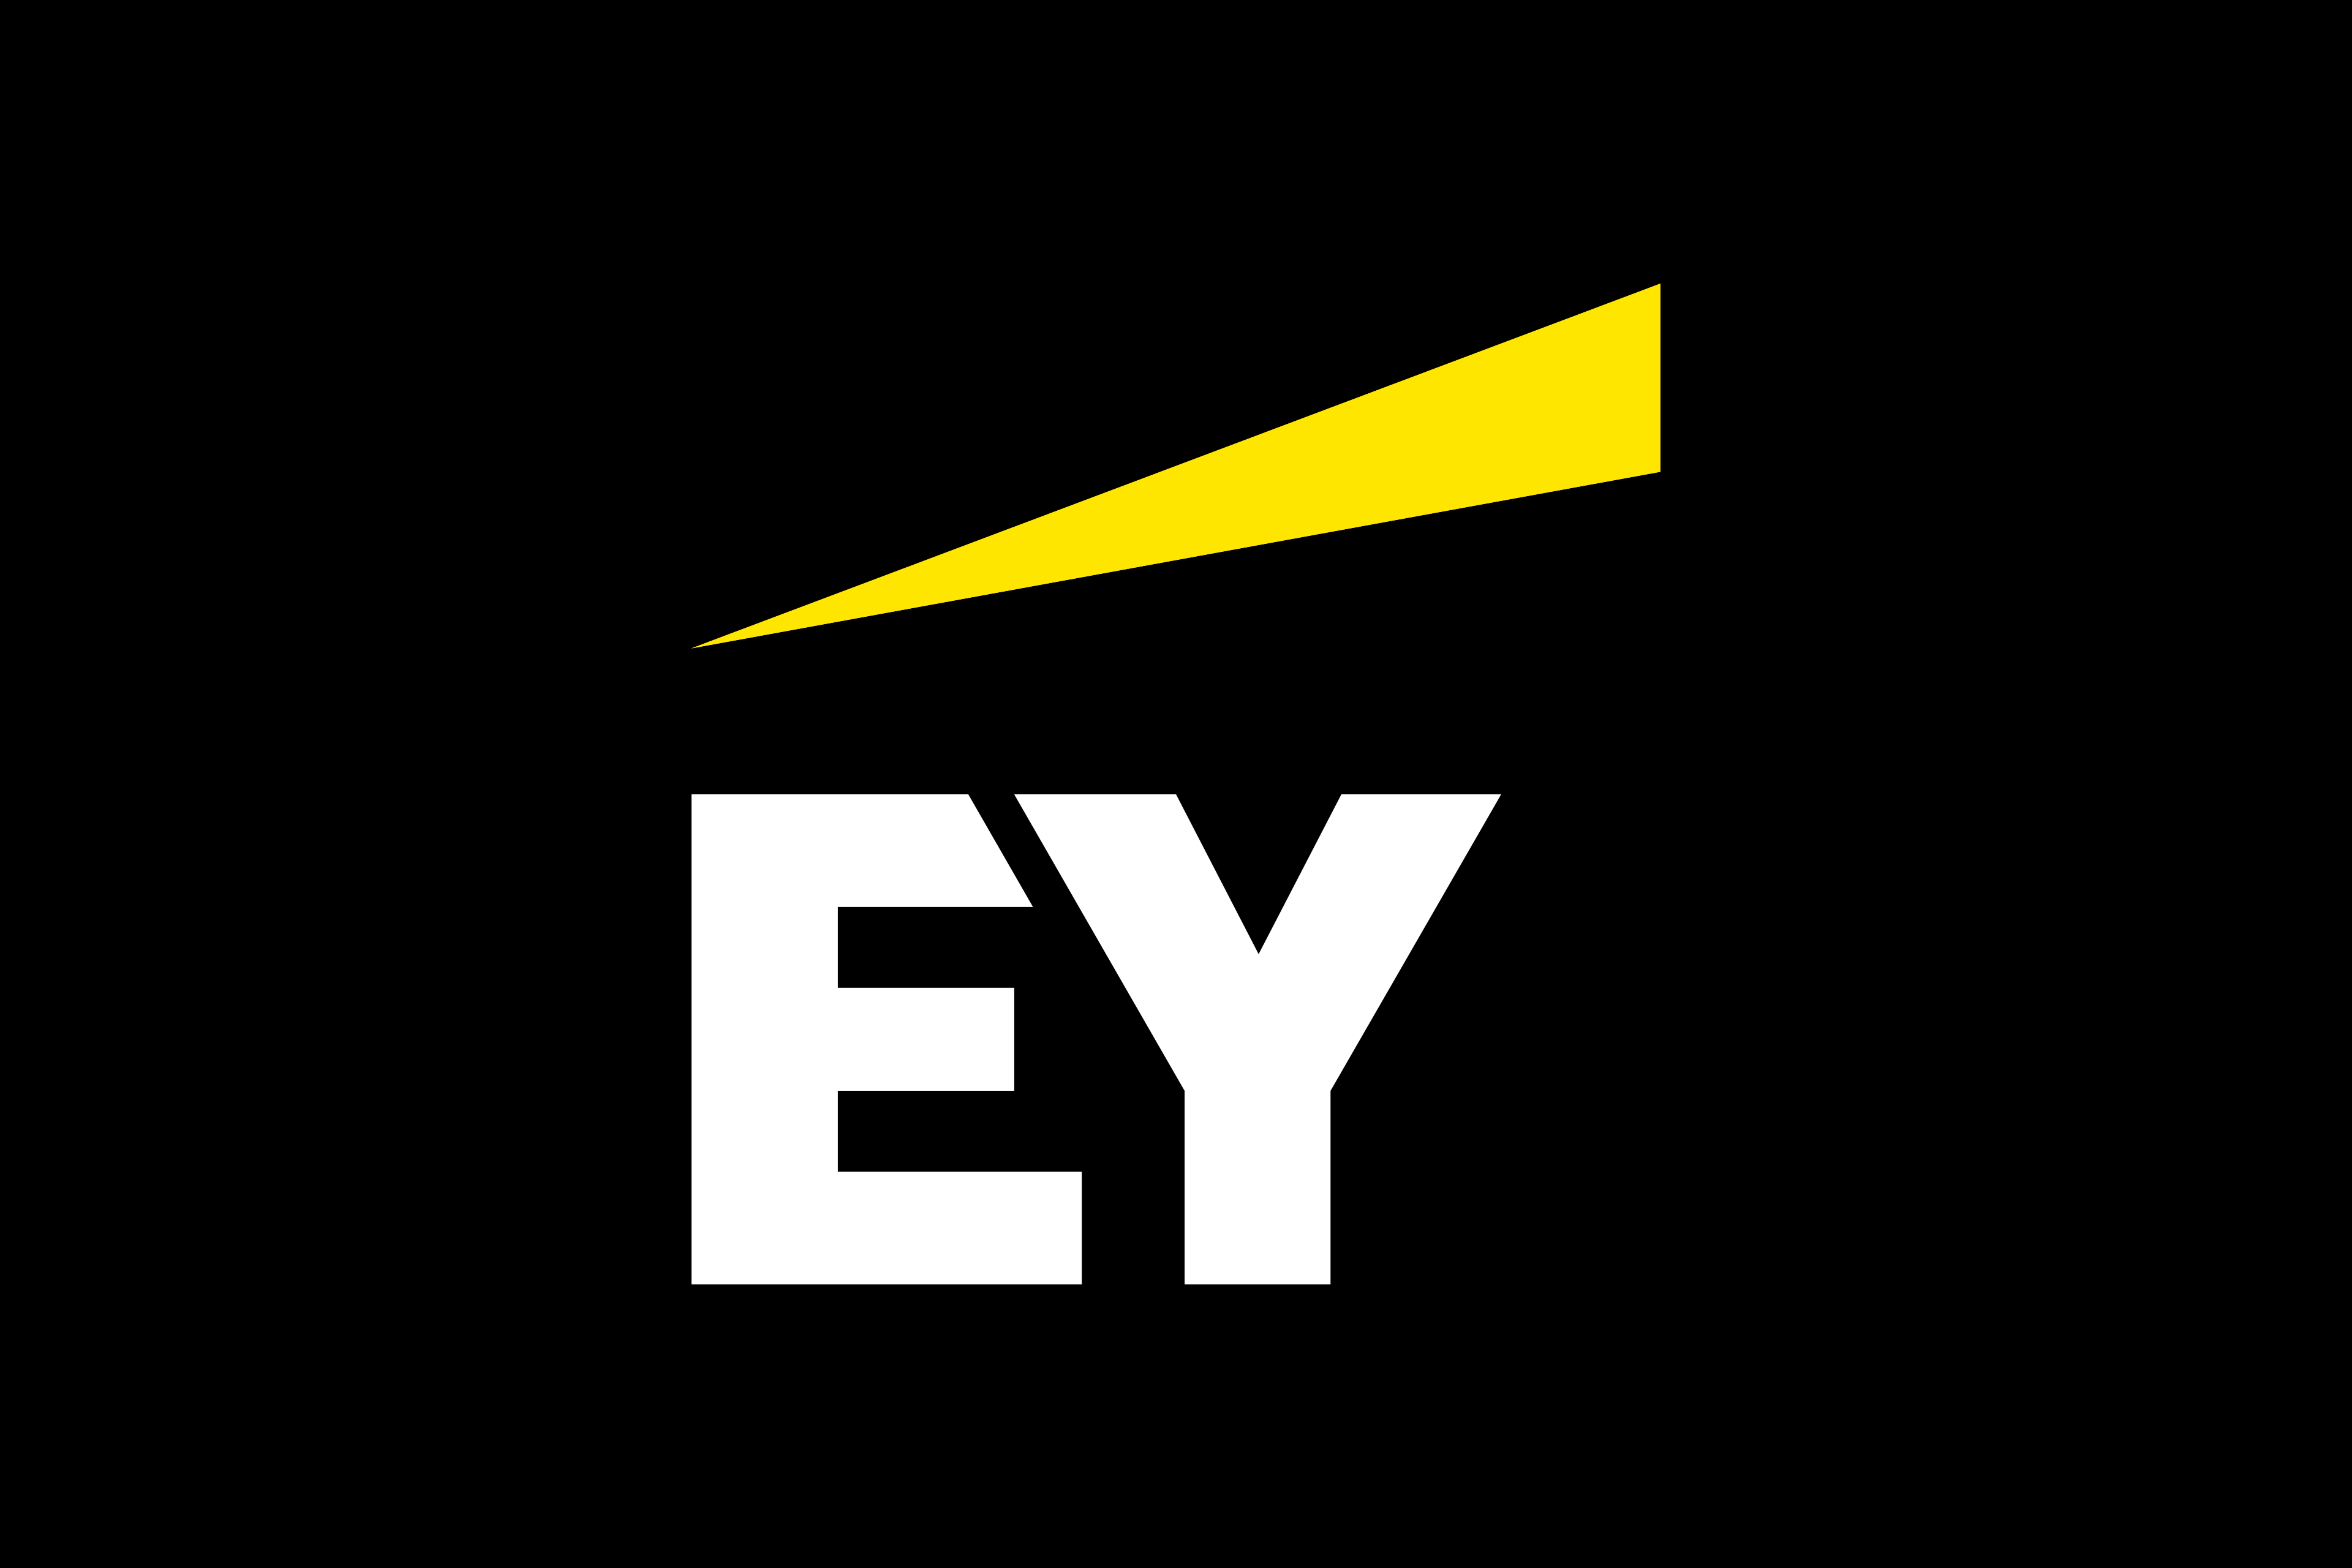 EY Future Consumer Index: Rising Cost of Living, Tighter Grip on Finances